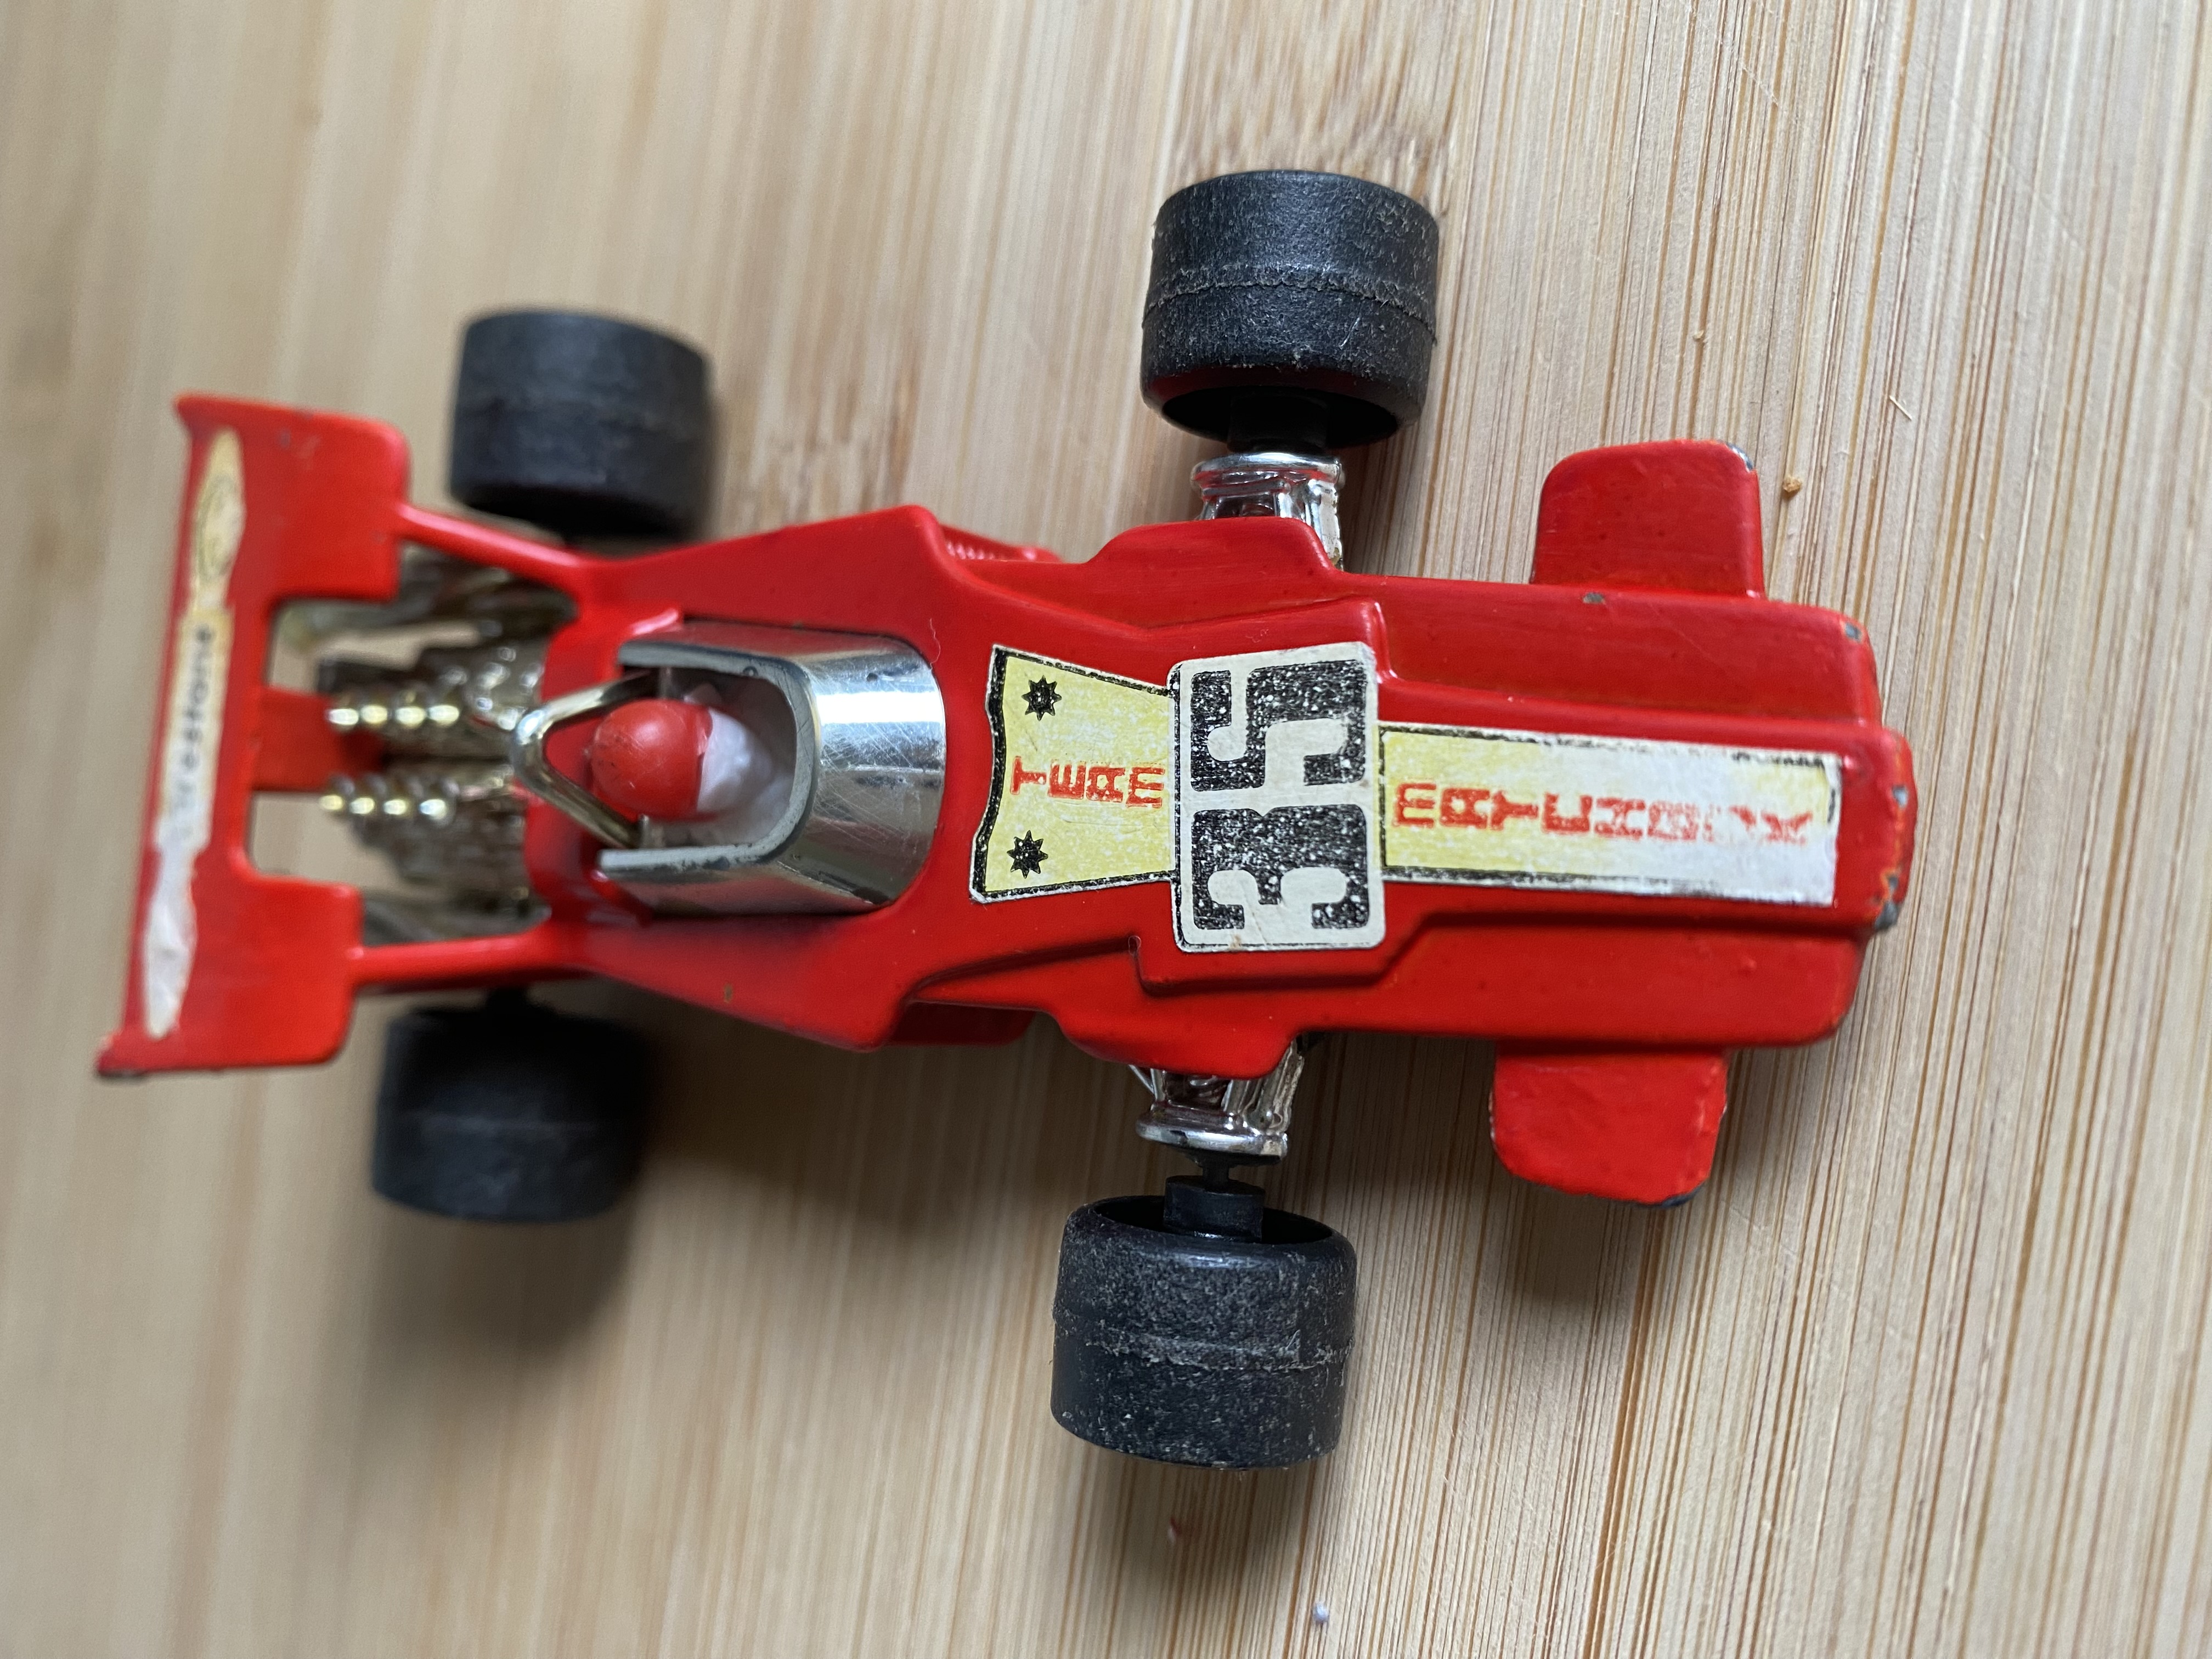 Formula One Racing Car Team #35 by Matchbox Vintage Original 1971 Makers Made in England Collectors Antique Classic Red Firestone Toys Cars Speedkings LESNEY PRODUCTS &.Co Limited Trending British collection Edition